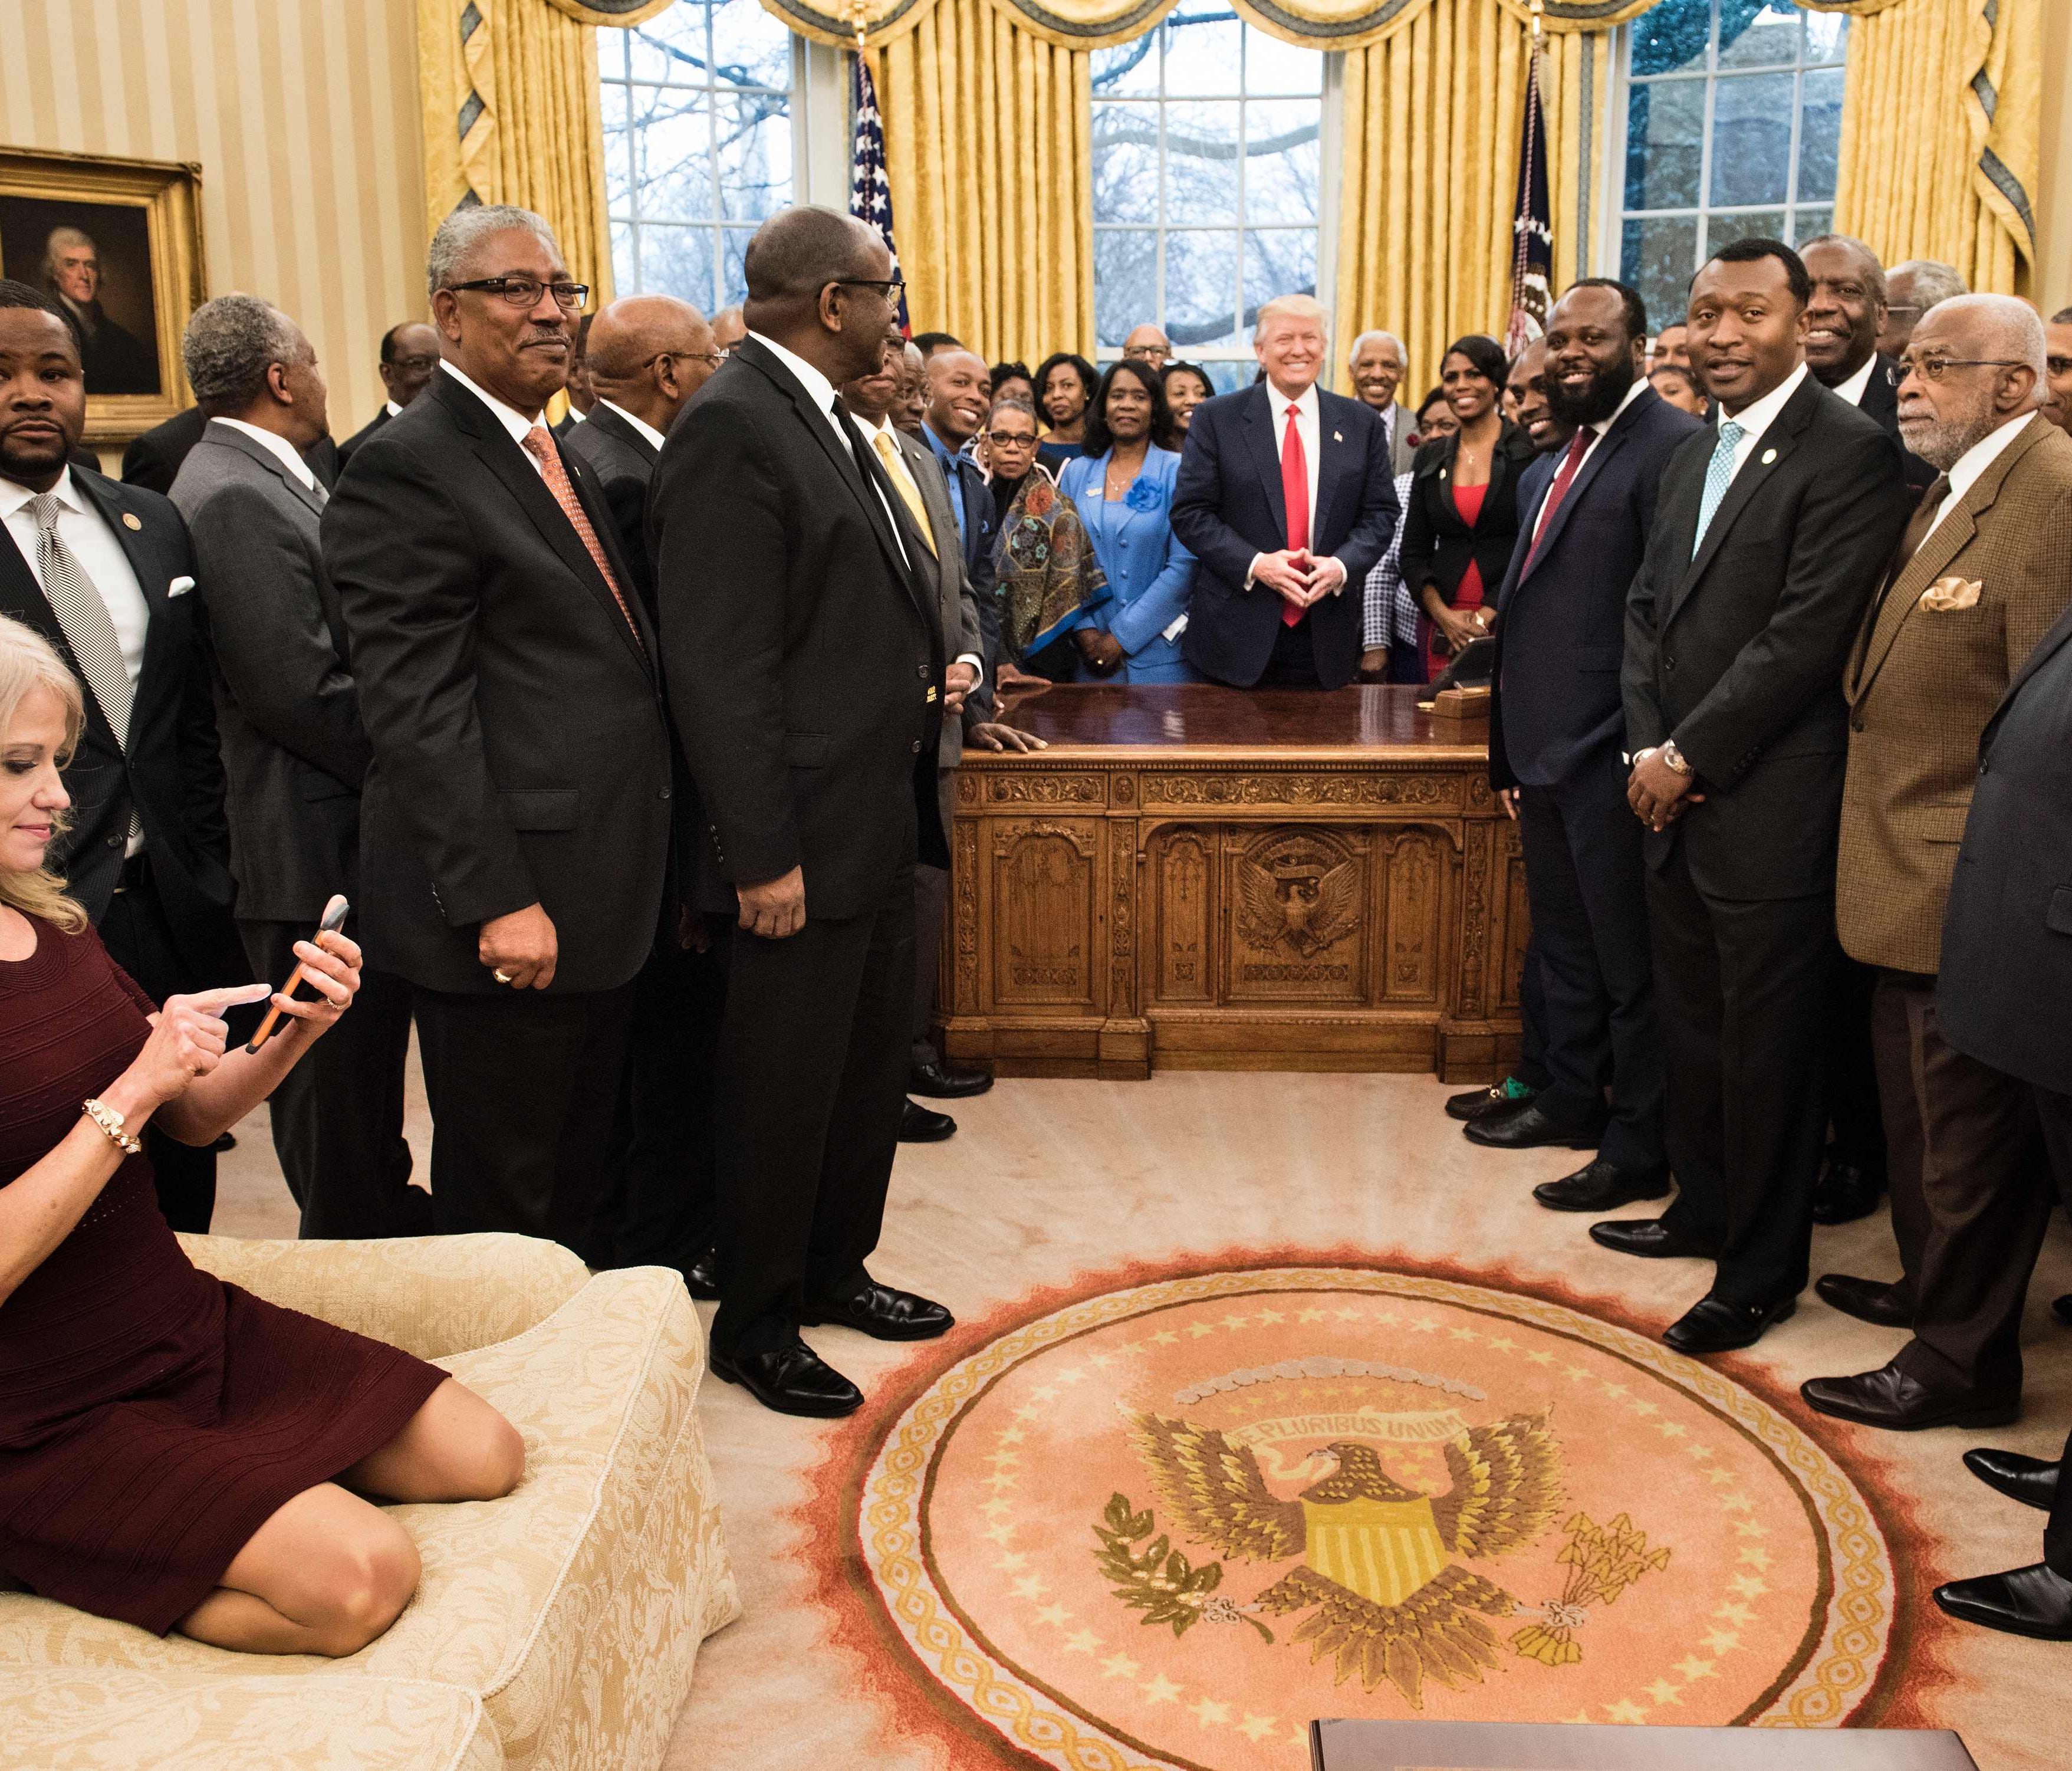 Kellyanne Conway is pictured kneeling on the Oval Office couch during President Trump's meeting with leaders from historically black colleges and universities at the White House on Monday.